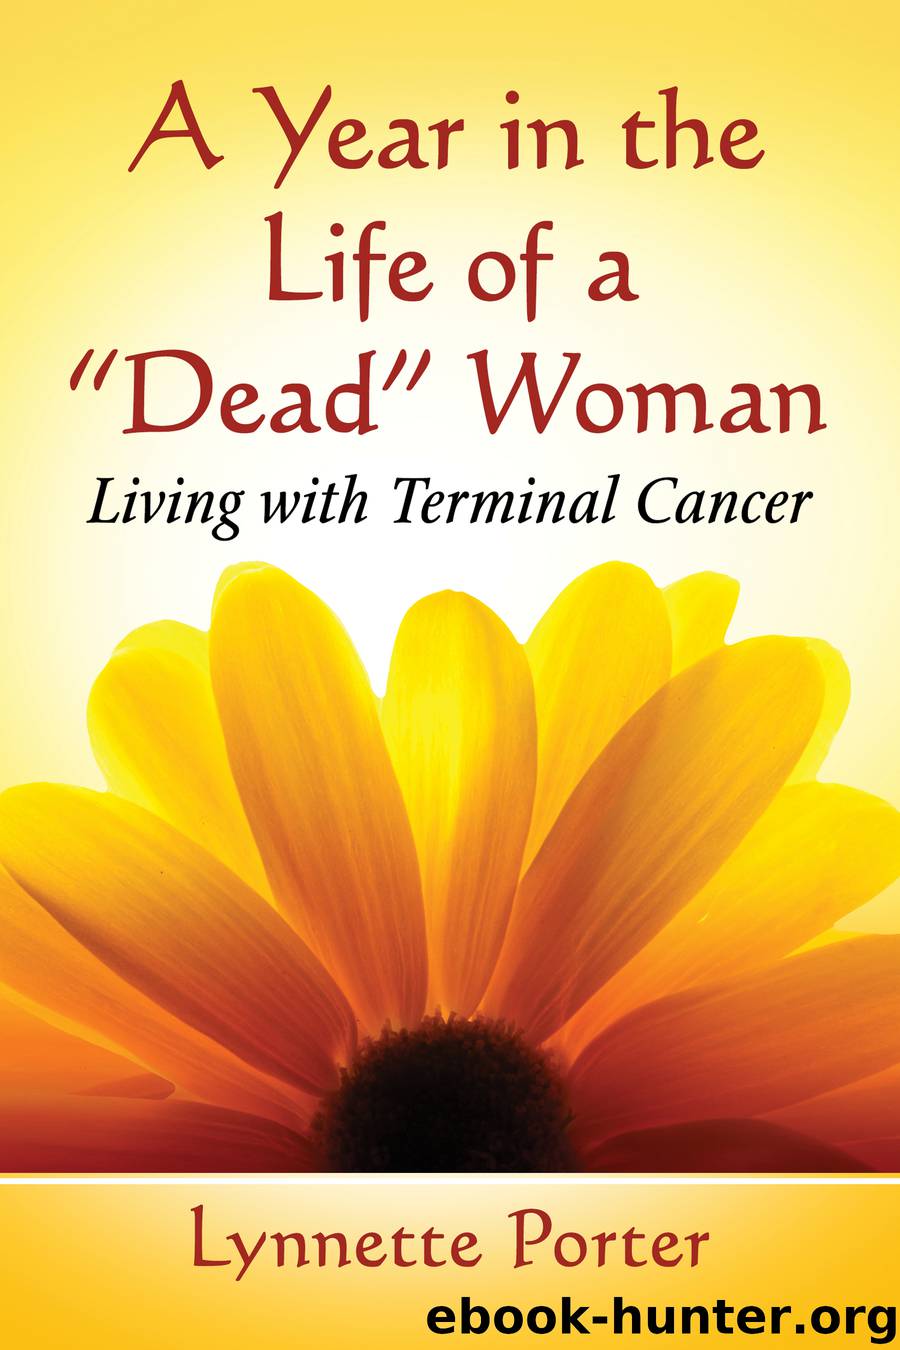 A Year in the Life of a "Dead" Woman by Lynnette Porter